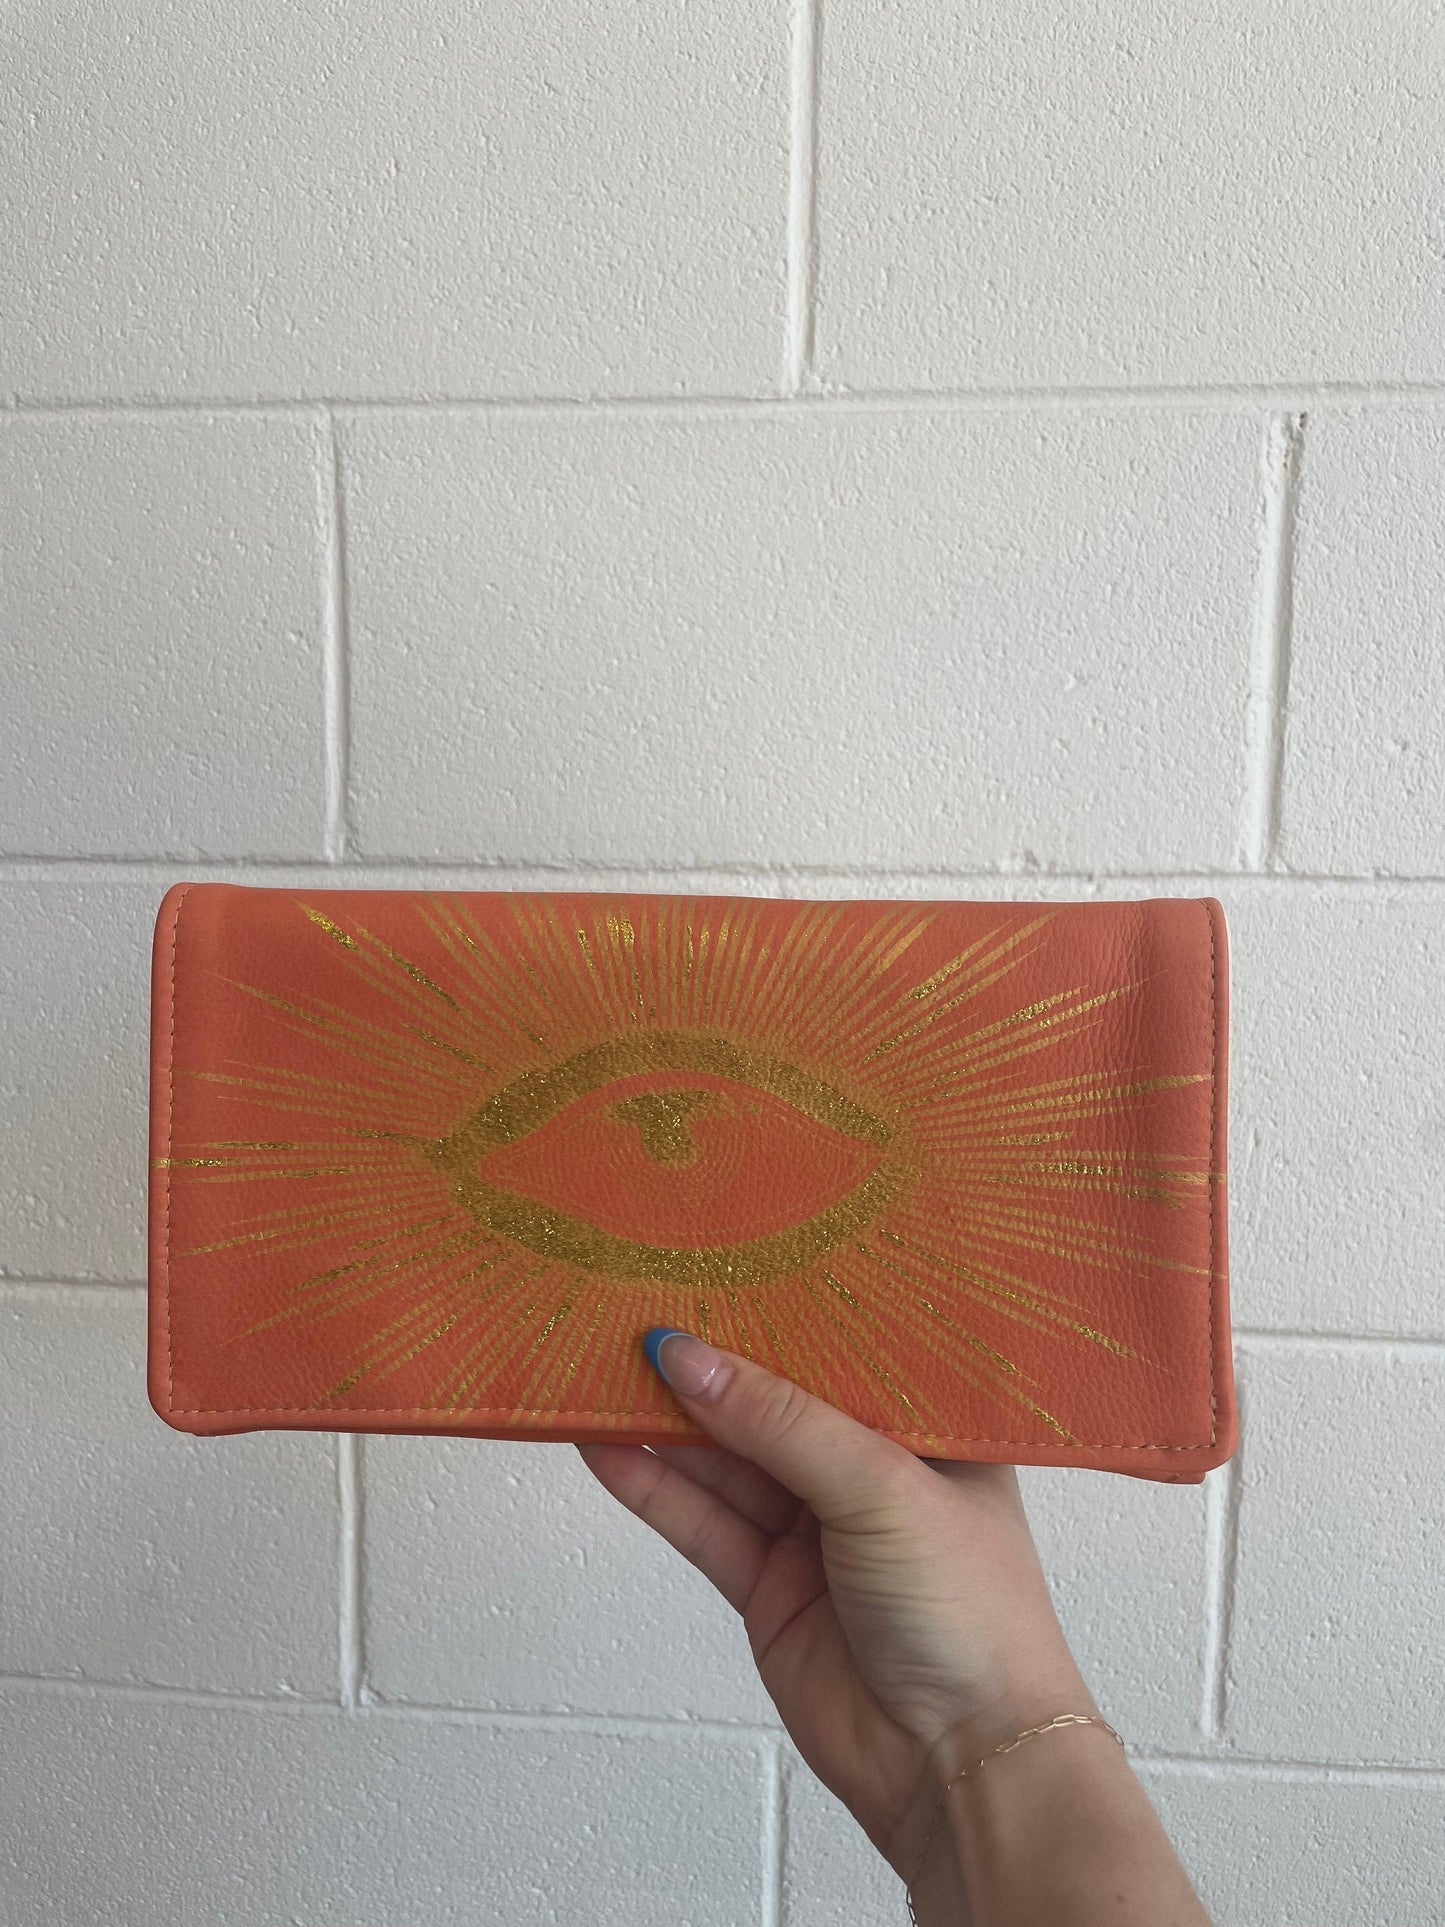 Leather Clutch in Orange with Gold Eye by TOTeM Salvaged - Haven